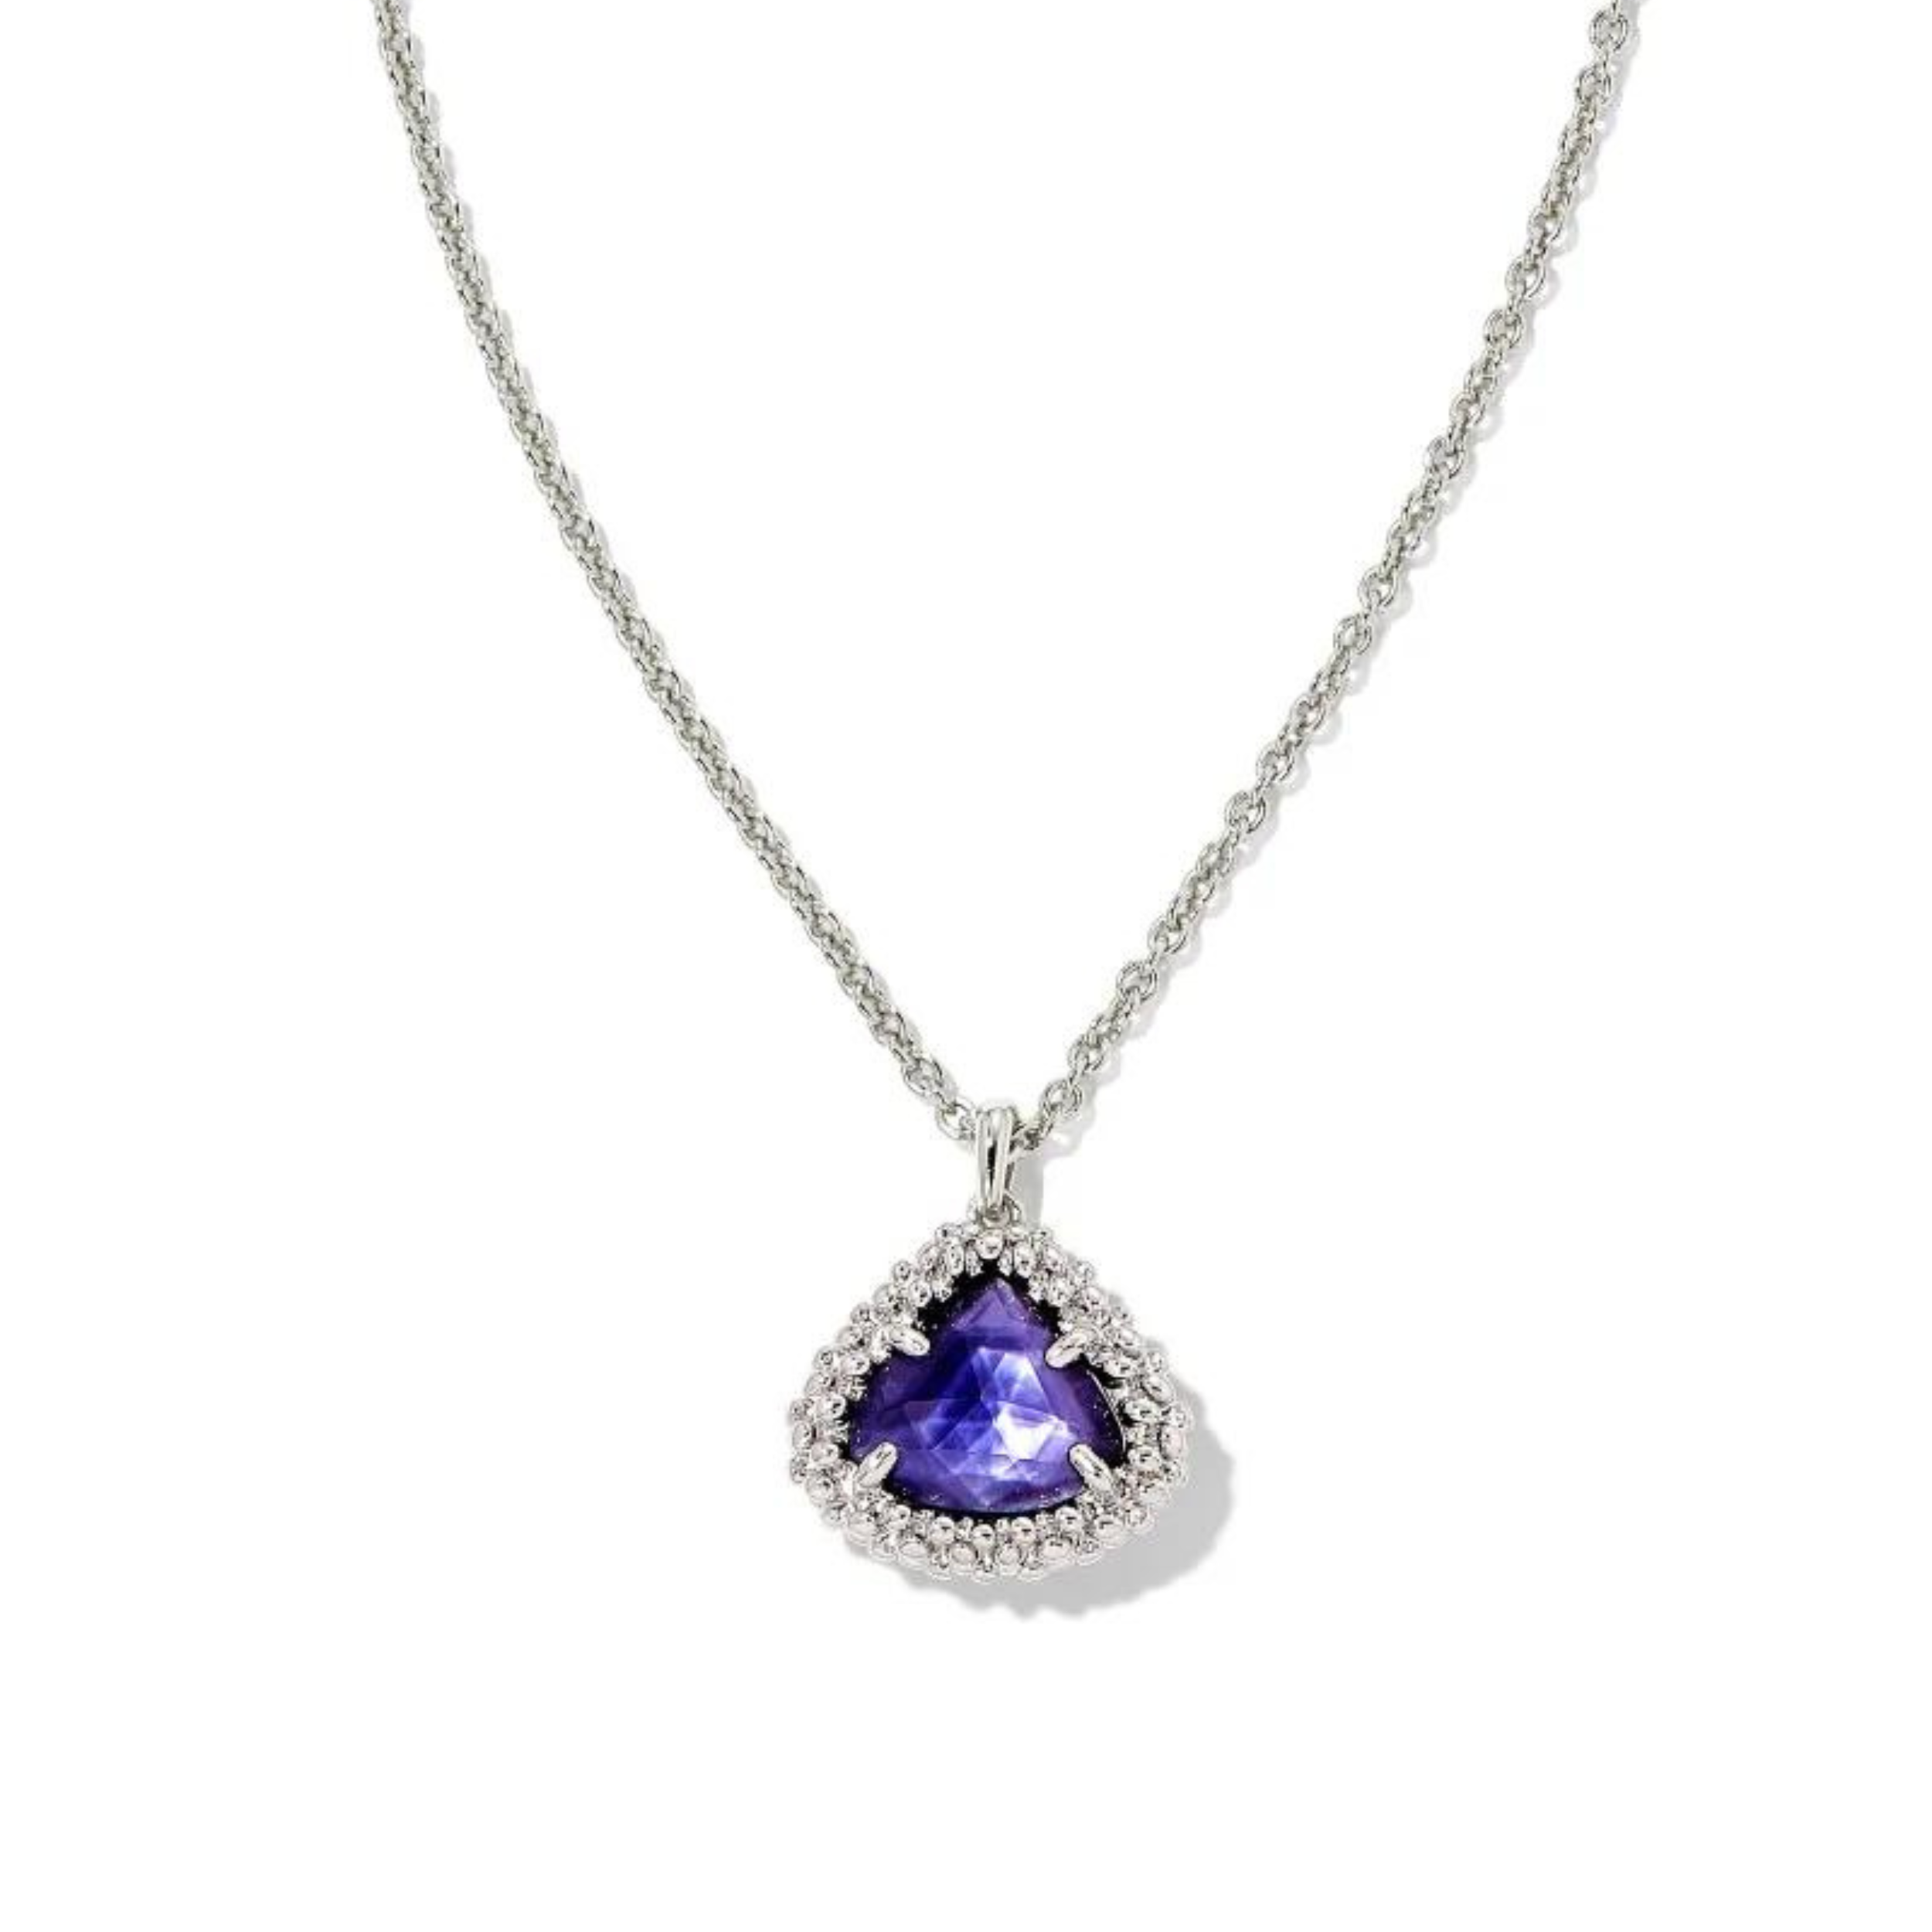 Kendra Scott | Framed Kendall Silver Short Pendant Necklace in Dark Lavender Illusion. Pictured on a white background.